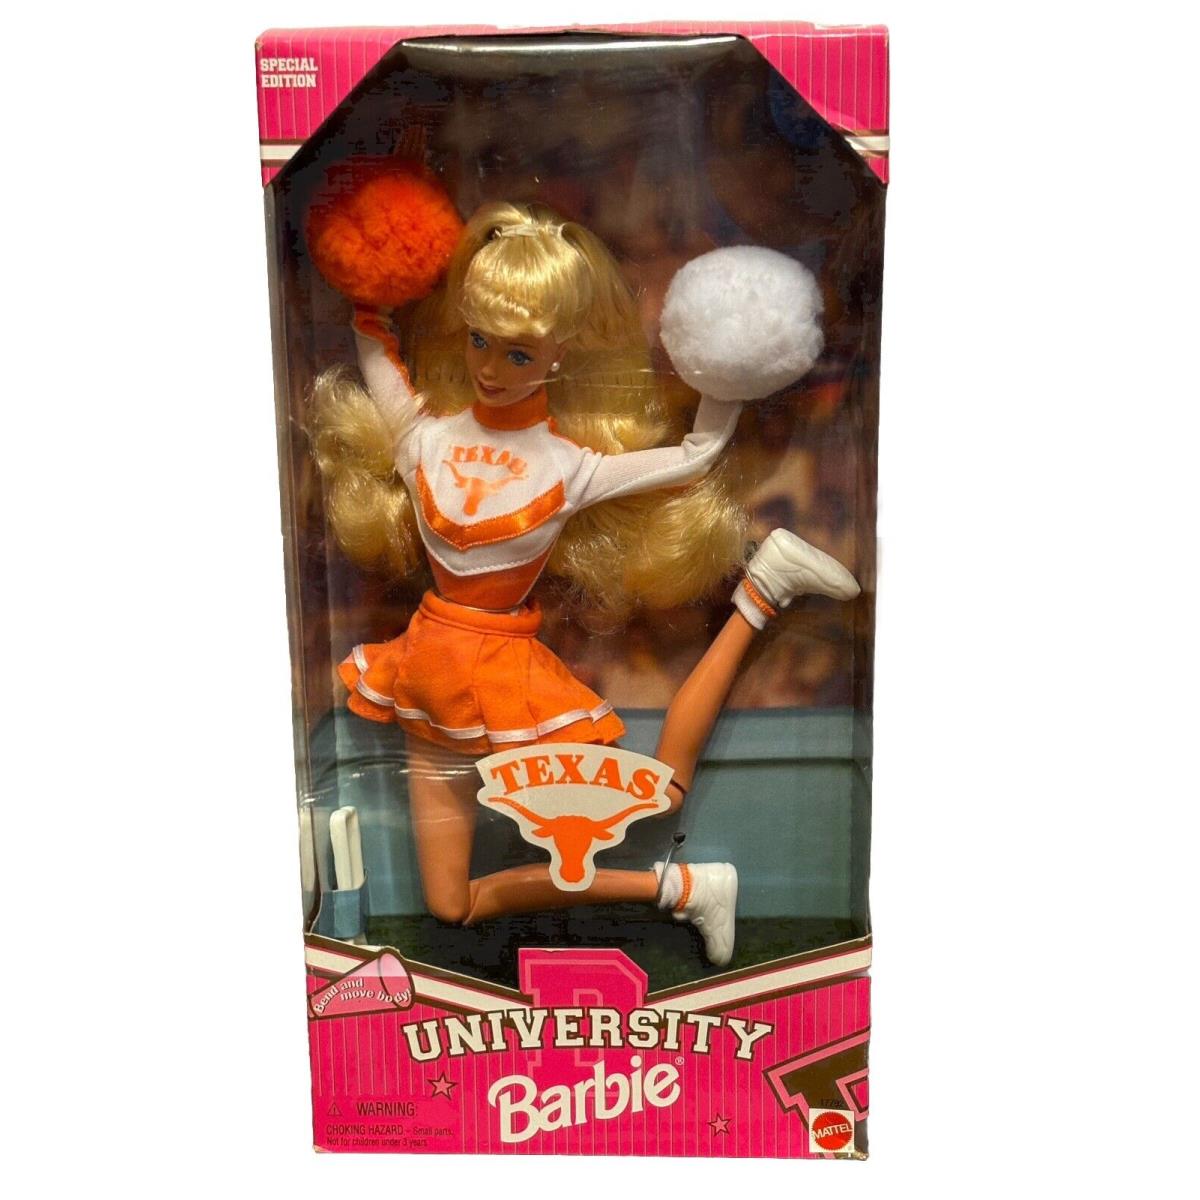 Vintage 1996 University Barbie Special Edition Texas by Mattel 17792